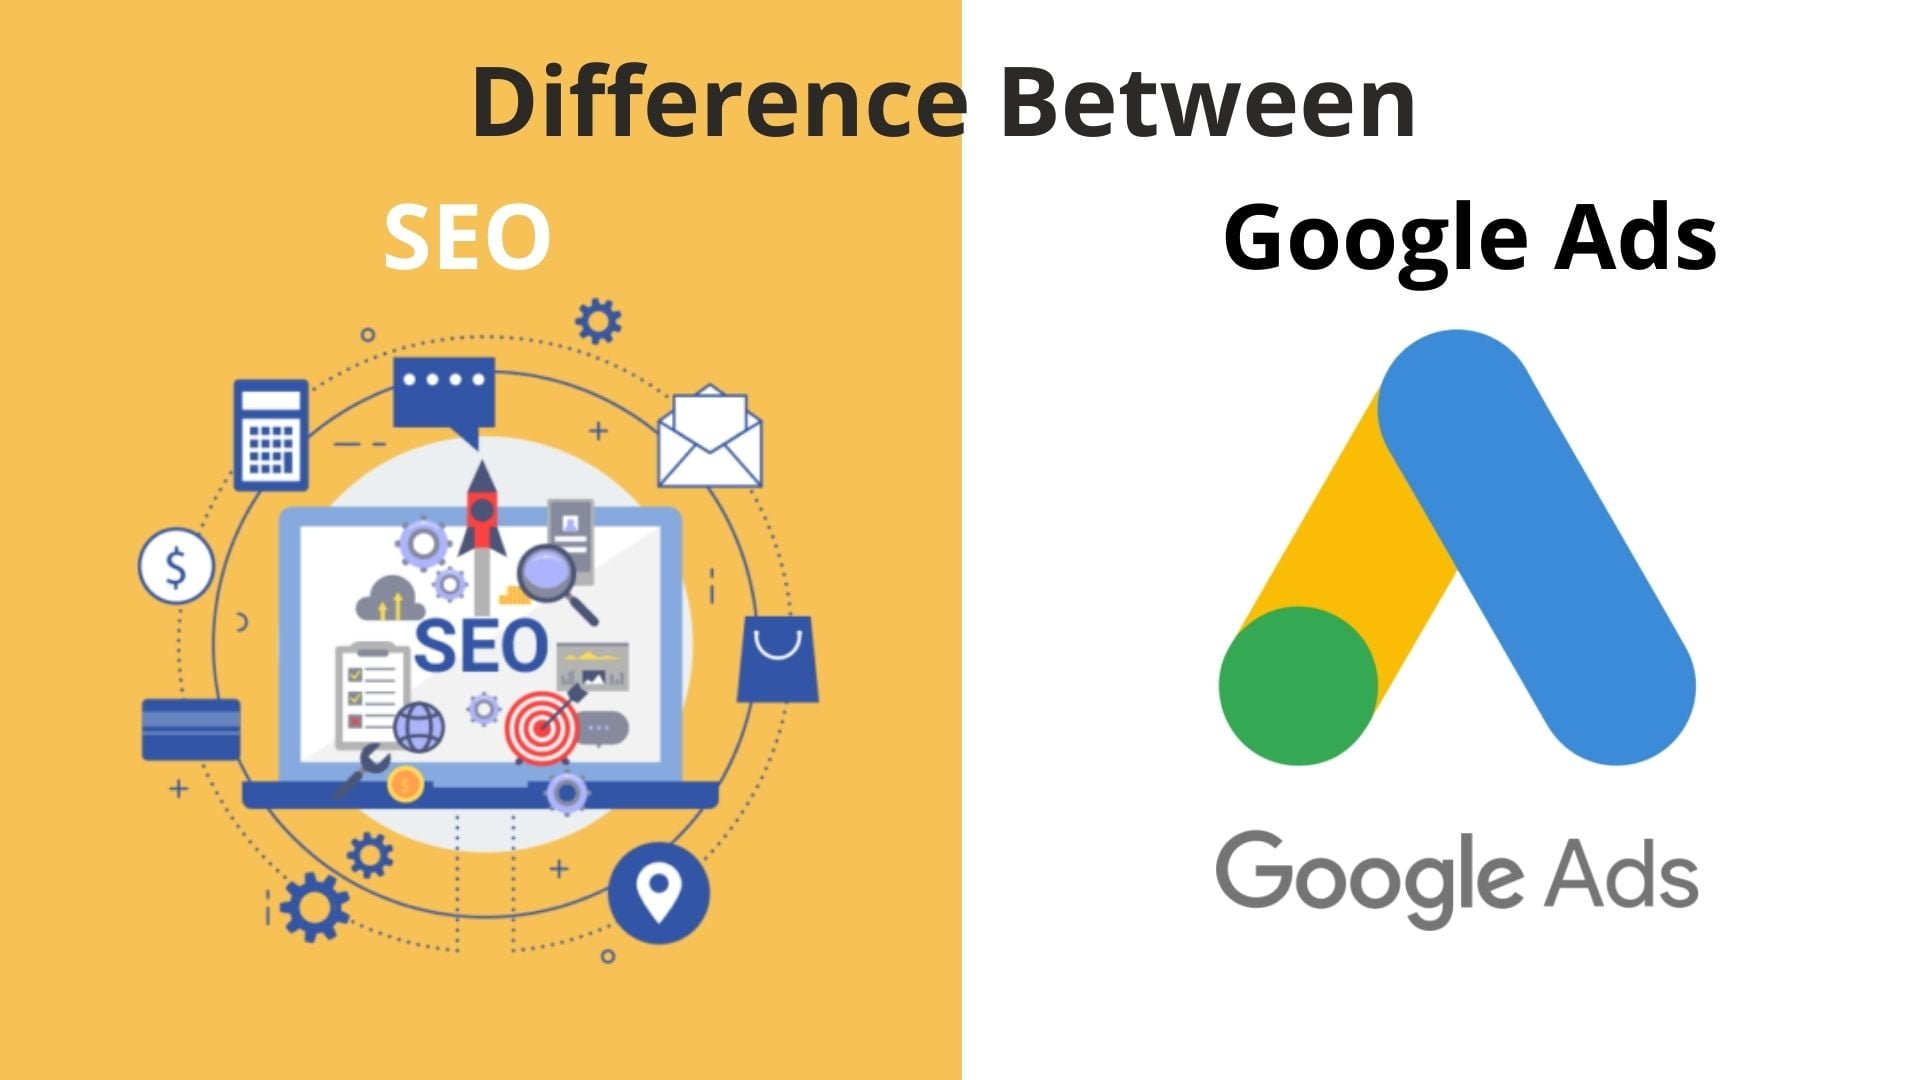 Difference Between SEO & Google Ads